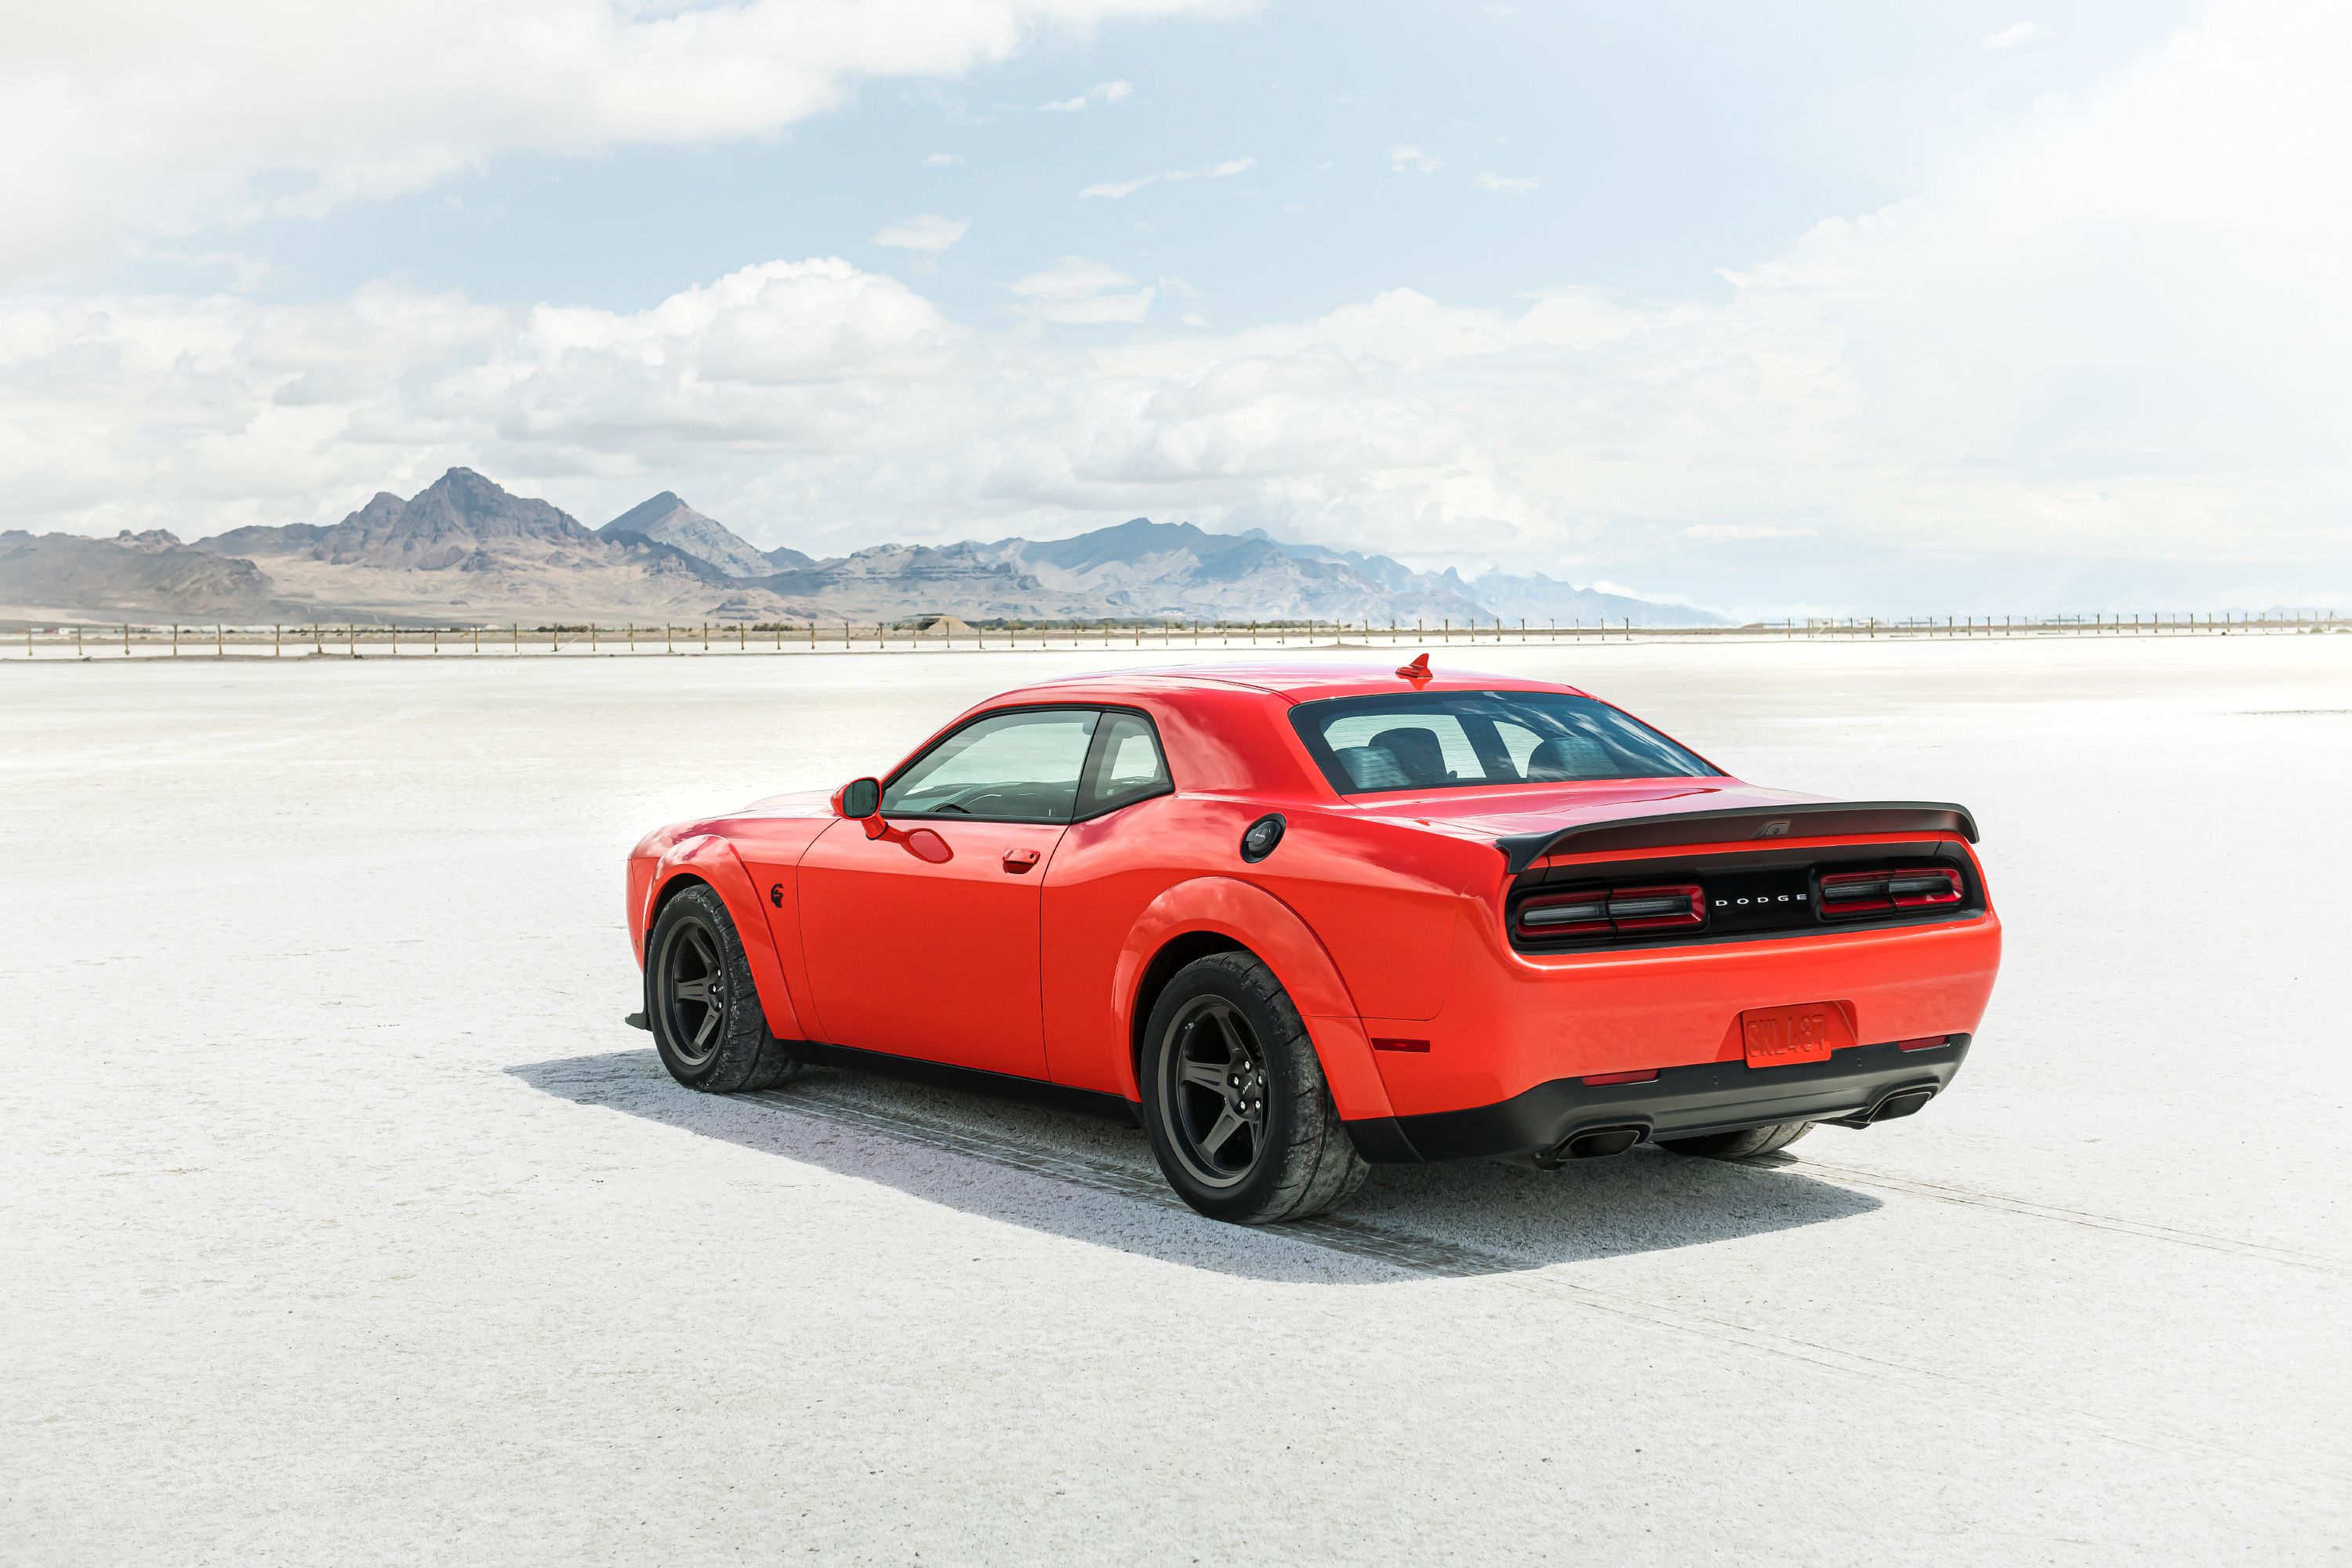 2021 Dodge Challenger SRT Hellcat Review, Pricing, and Specs